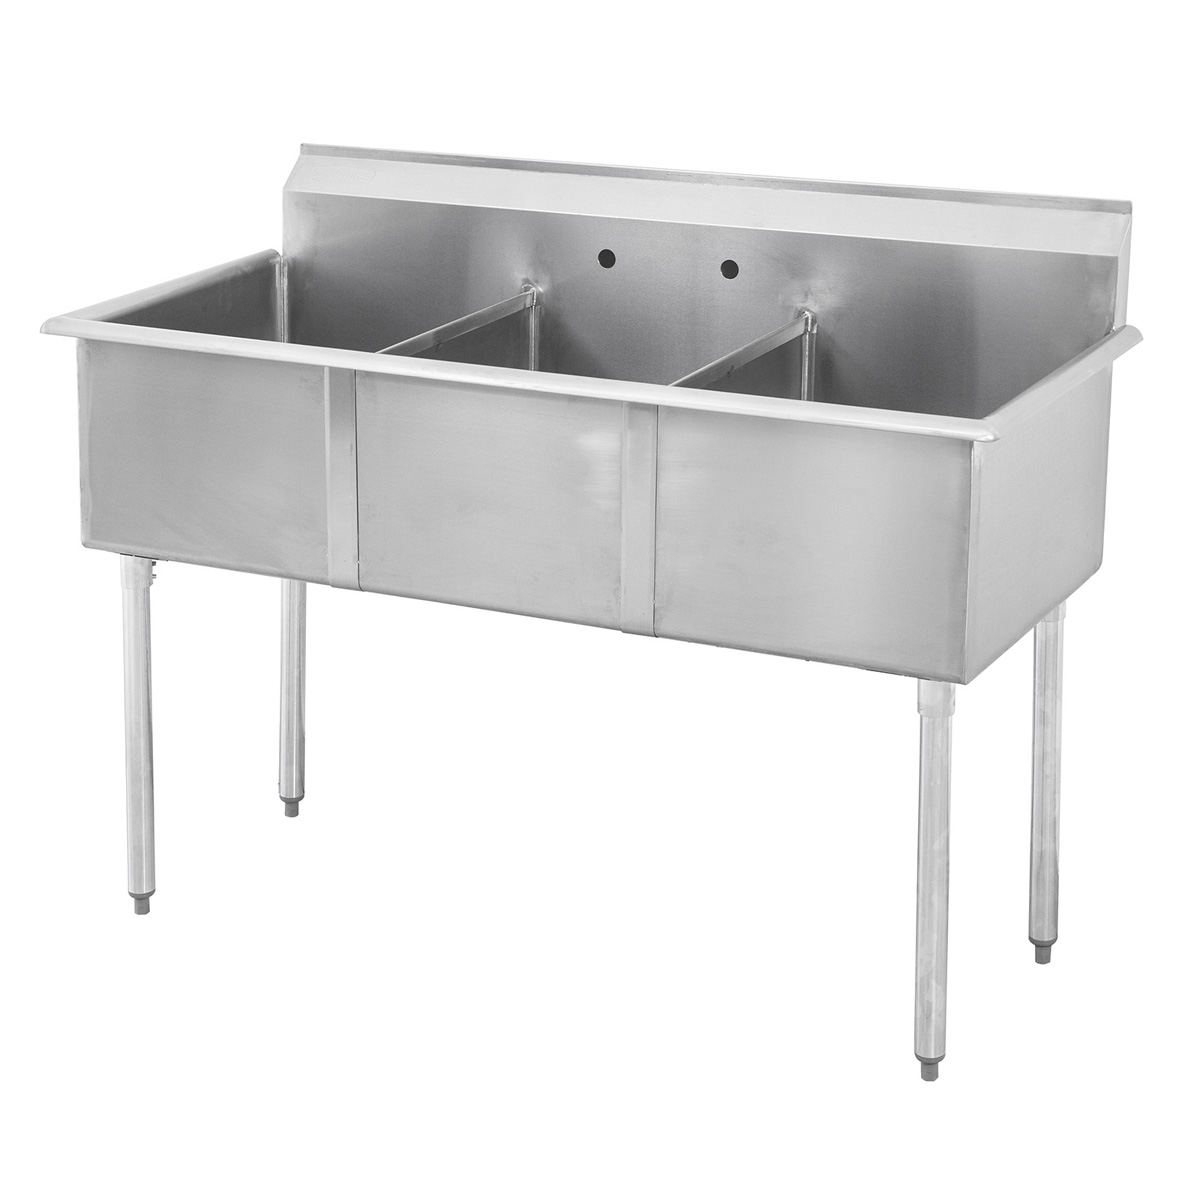 Sapphire SMSQ1214-3 Three Compartment Stainless Steel Budget Sink, 36"W x 17-1/2"D